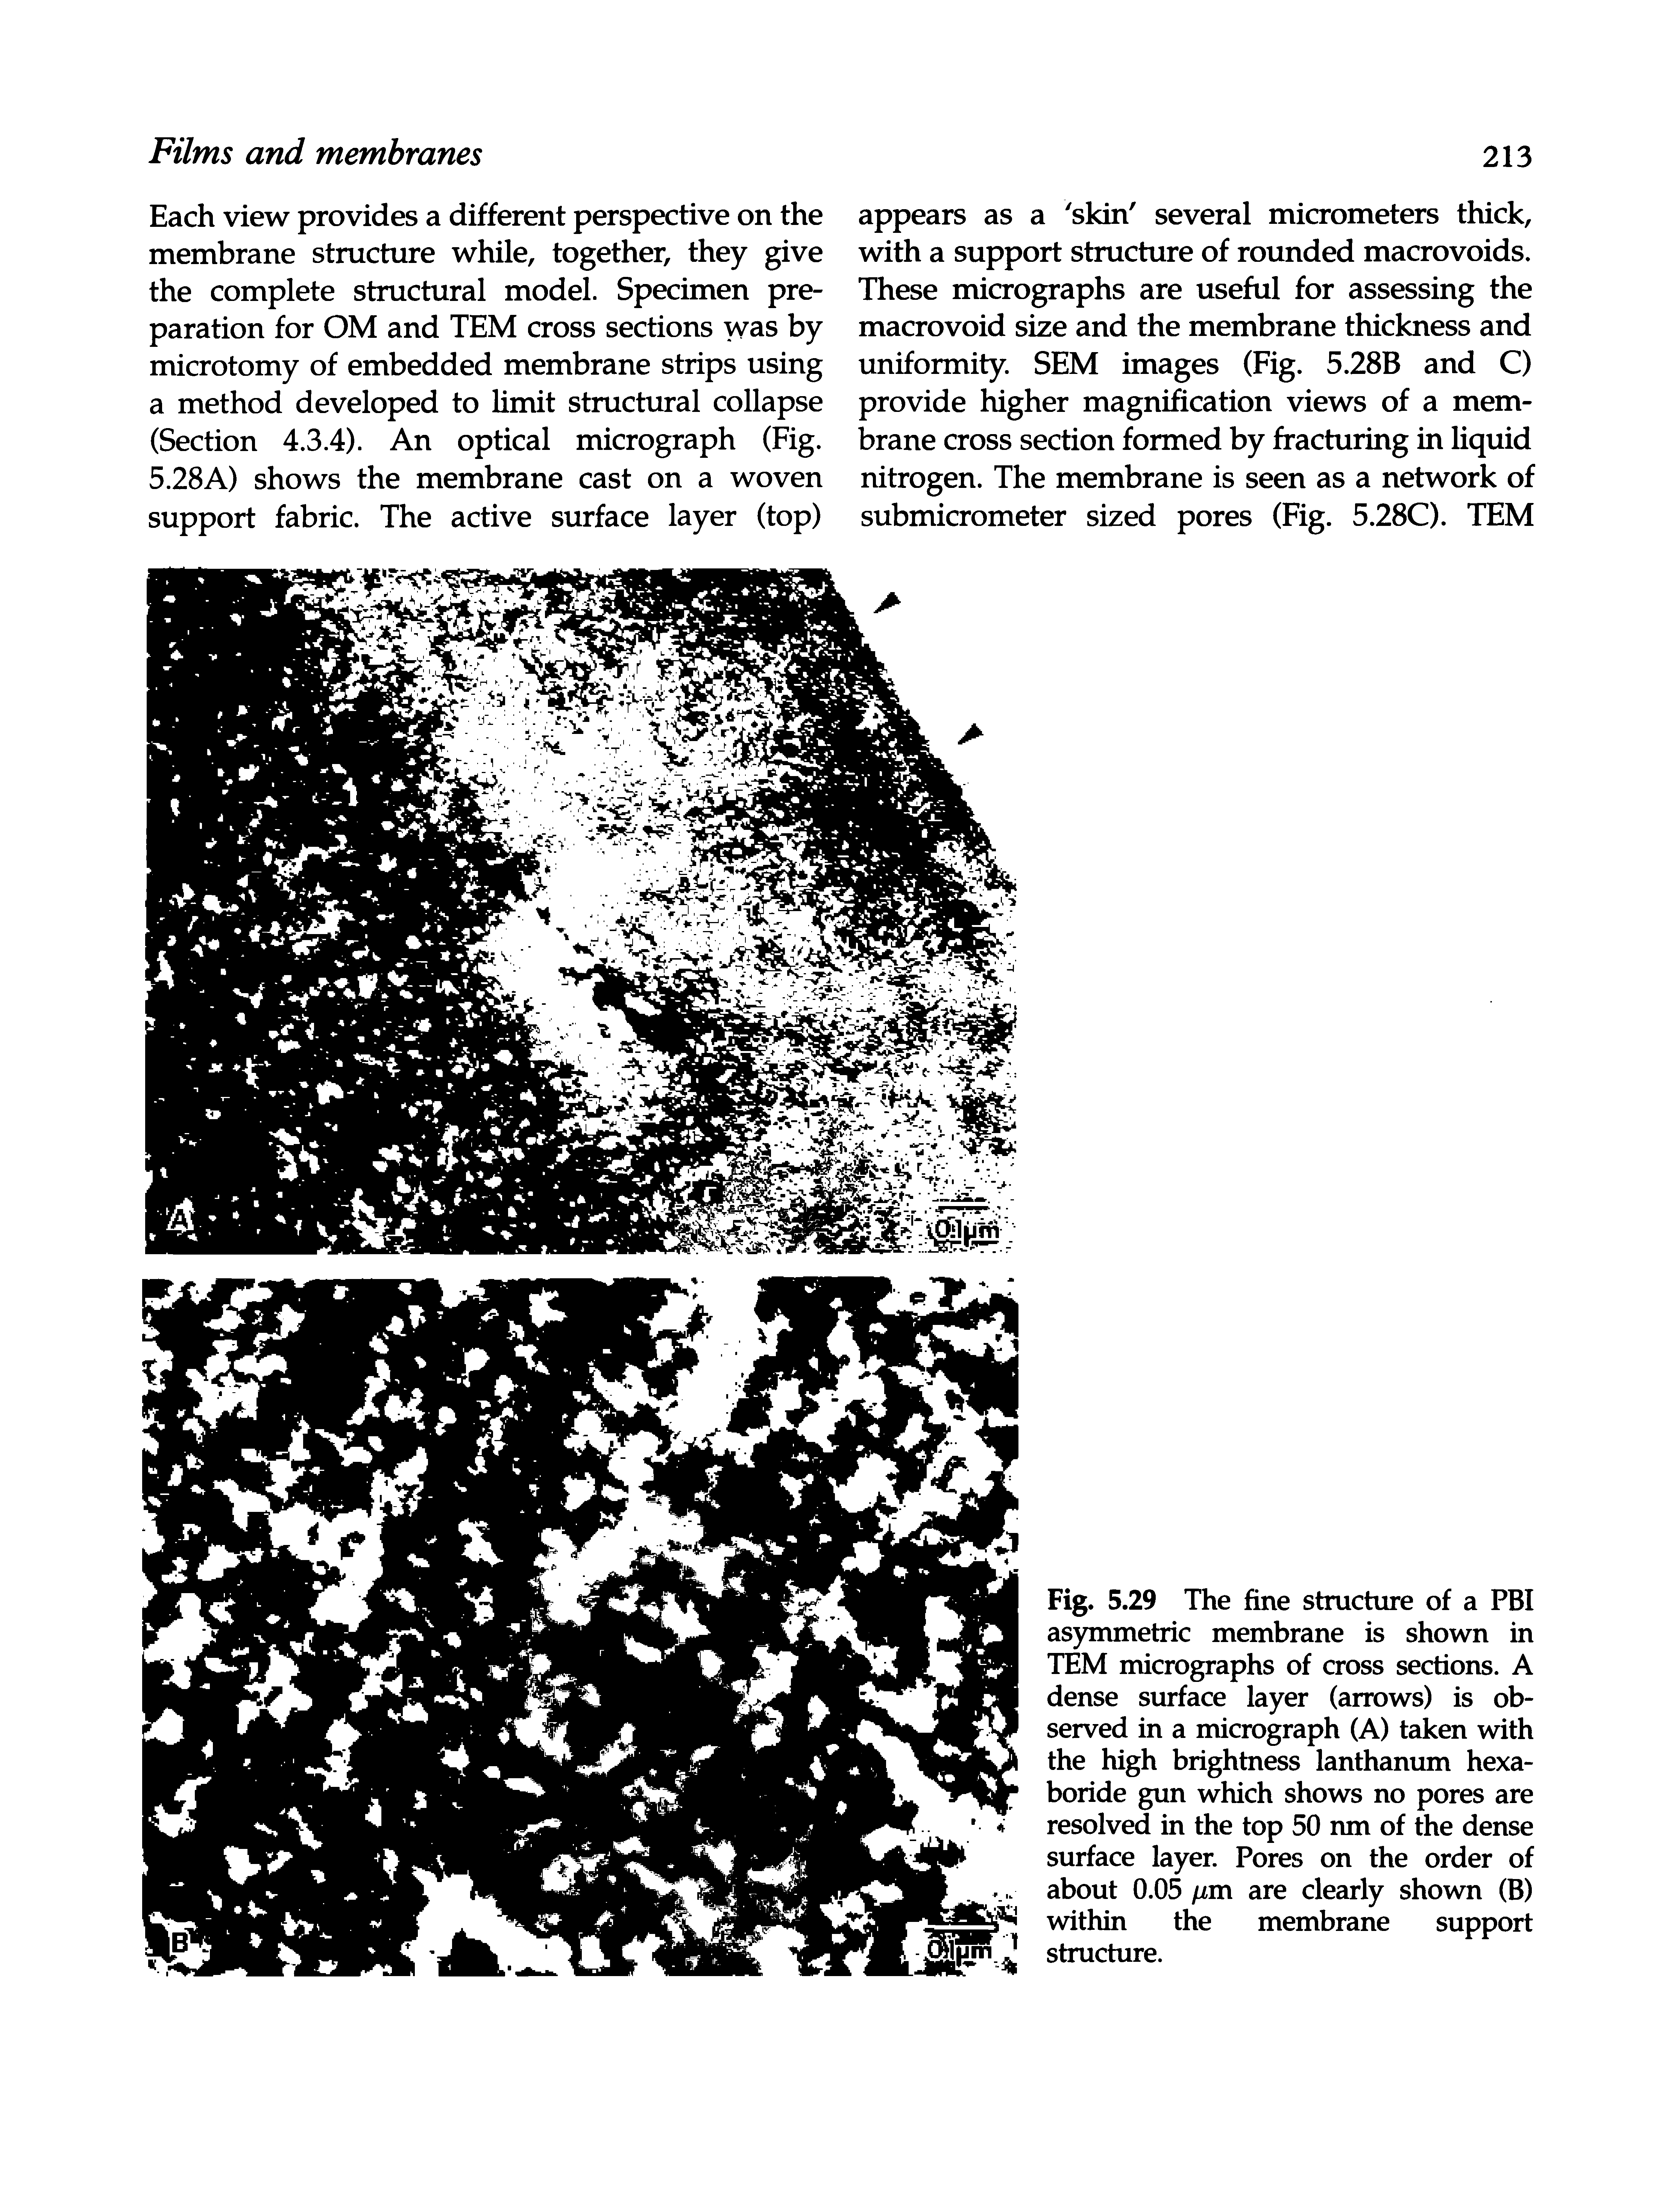 Fig. 5.29 The fine structure of a FBI asymmetric membrane is shown in TEM micrographs of cross sections. A dense surface layer (arrows) is observed in a nucrograph (A) taken with the high brightness lanthanum hexa-boride gun which shows no pores are resolved in the top 50 nm of the dense surface layer. Pores on the order of about 0.05 //m are clearly shown (B) within the membrane support structure.